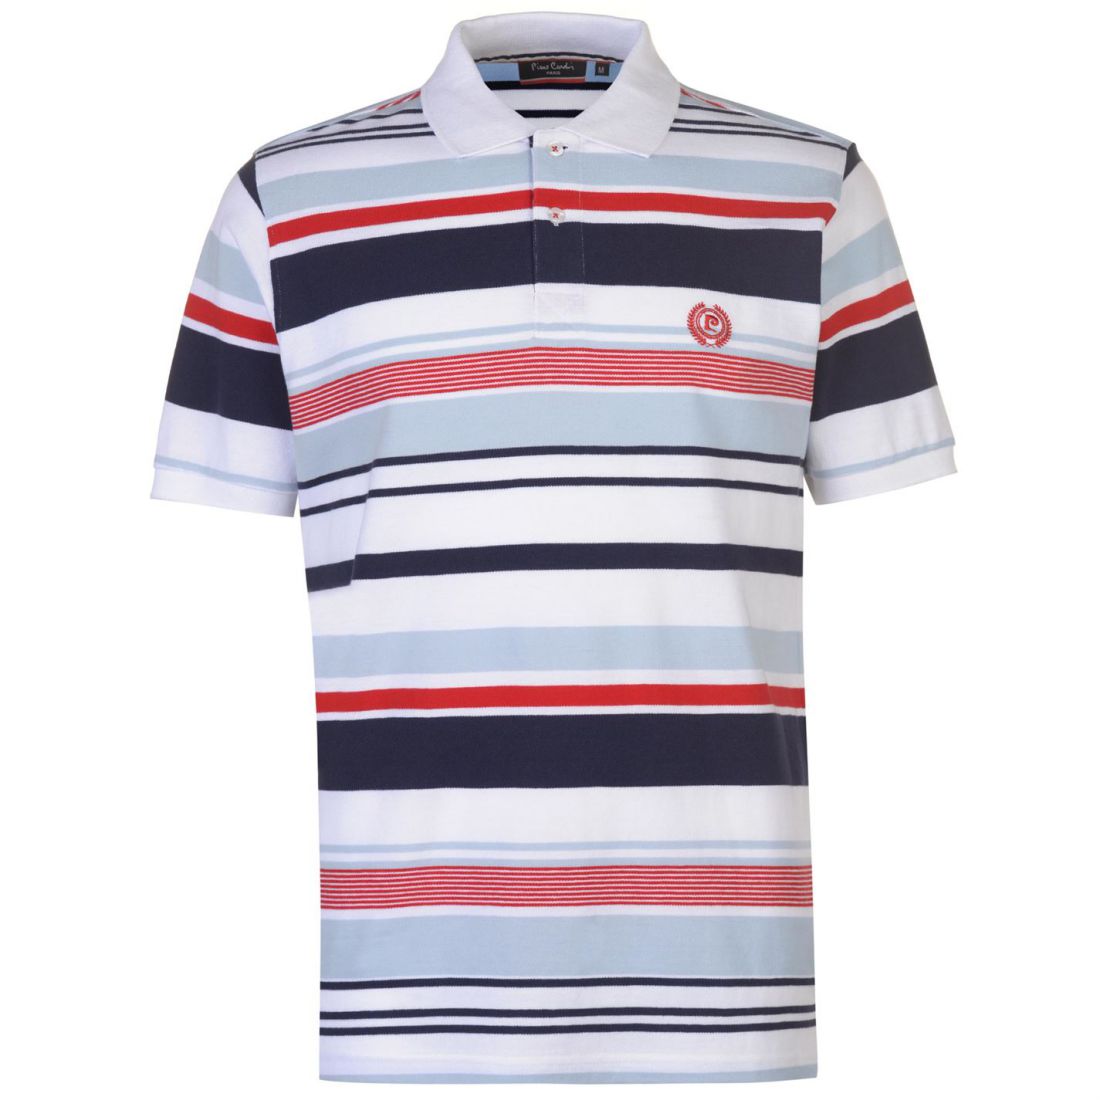 PIERRE CARDIN STRIPE Polo Shirt Mens Gents Classic Fit Tee Top Short ...